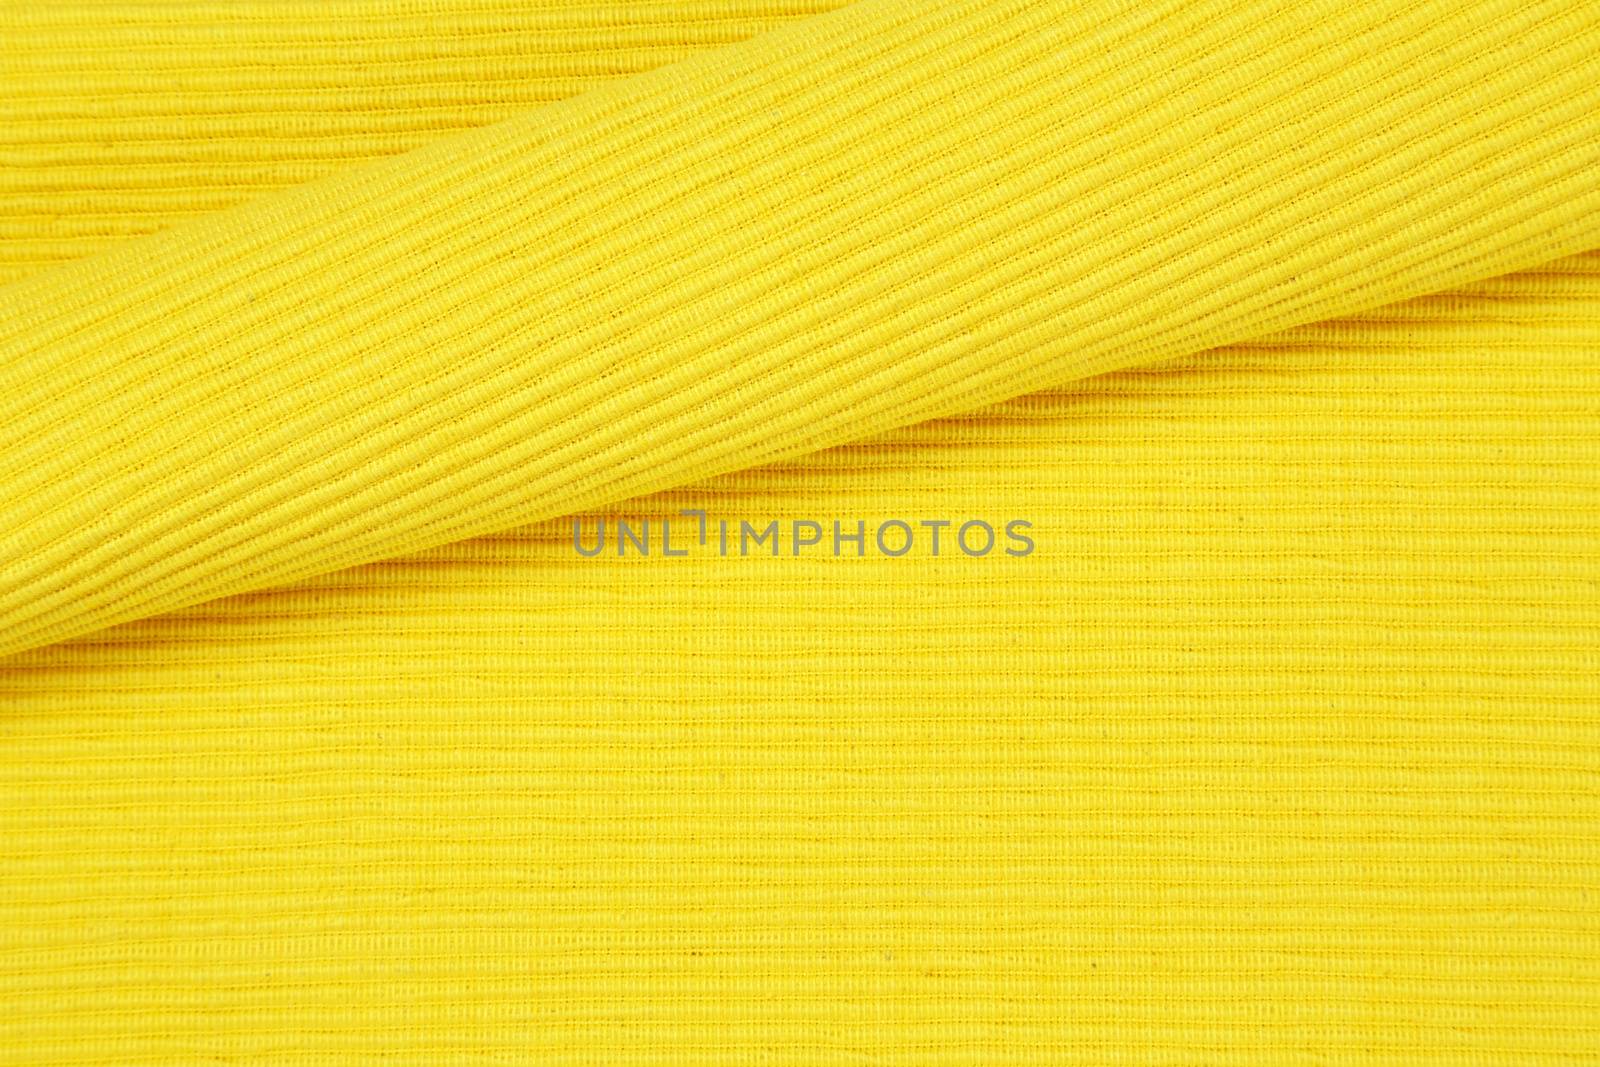 Detail of yellow woven cotton place mat - background, full frame